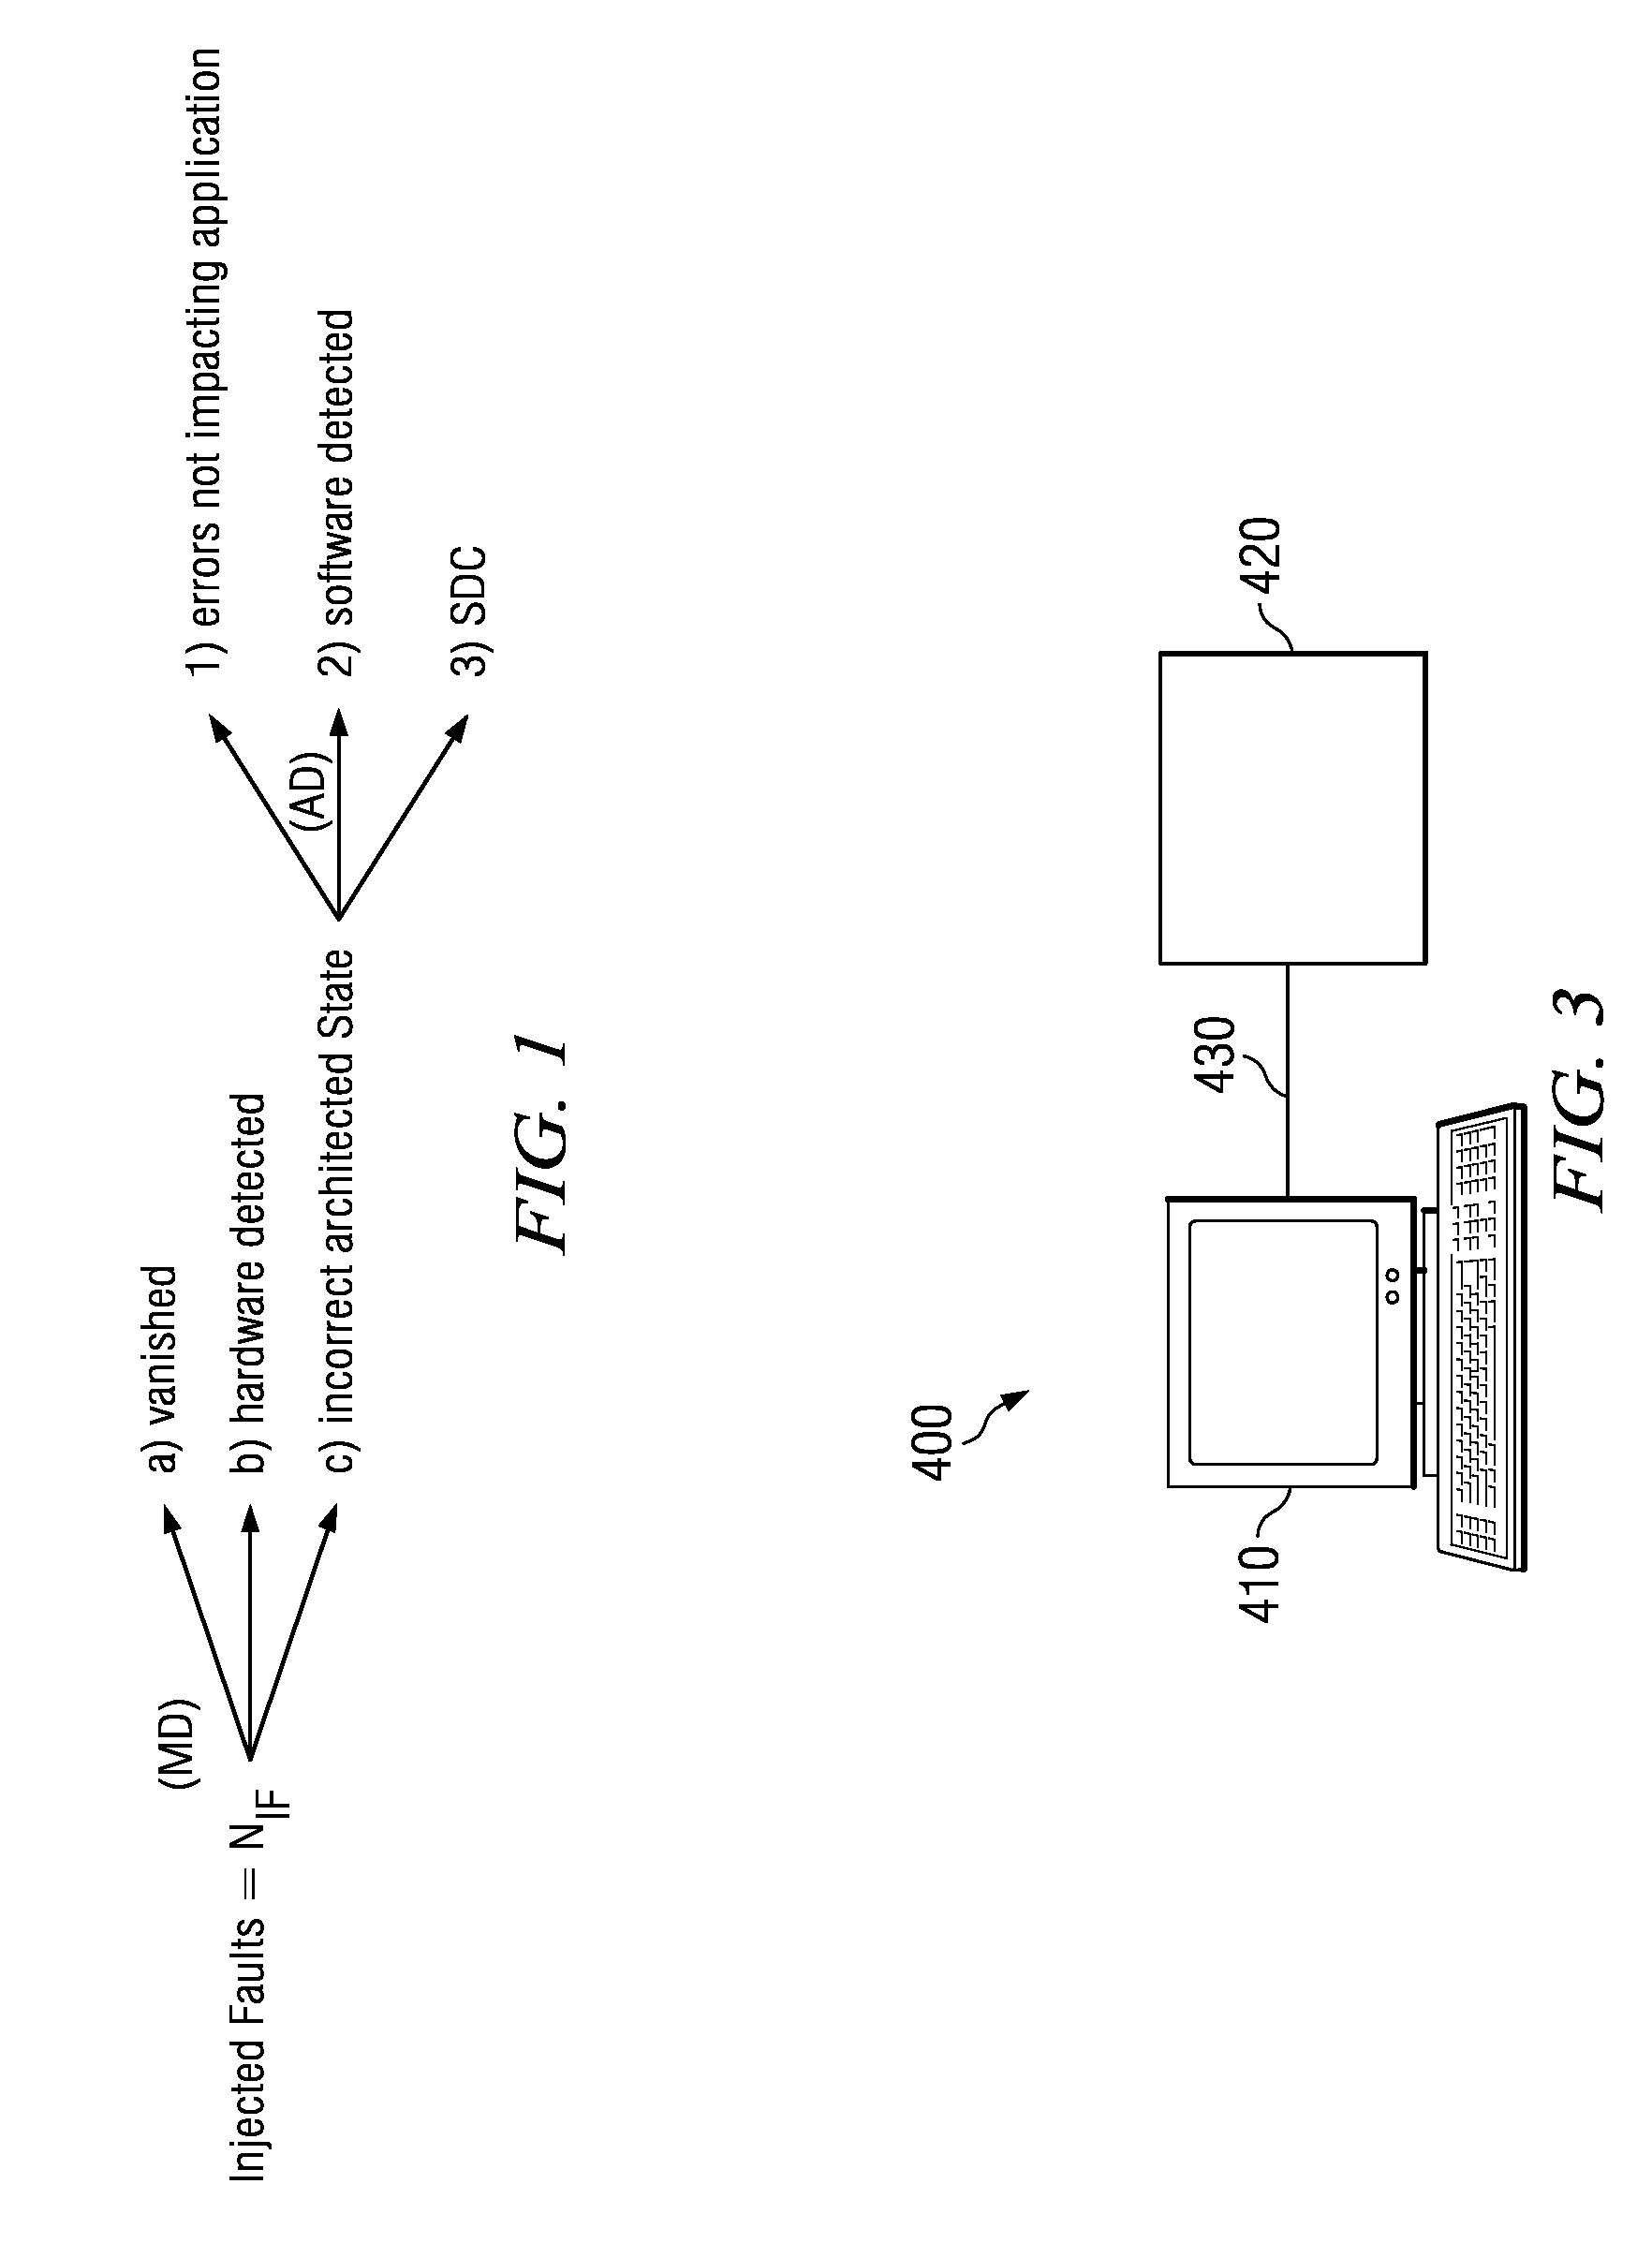 Method and Apparatus for Testing Soft Error Rate of an Application Program